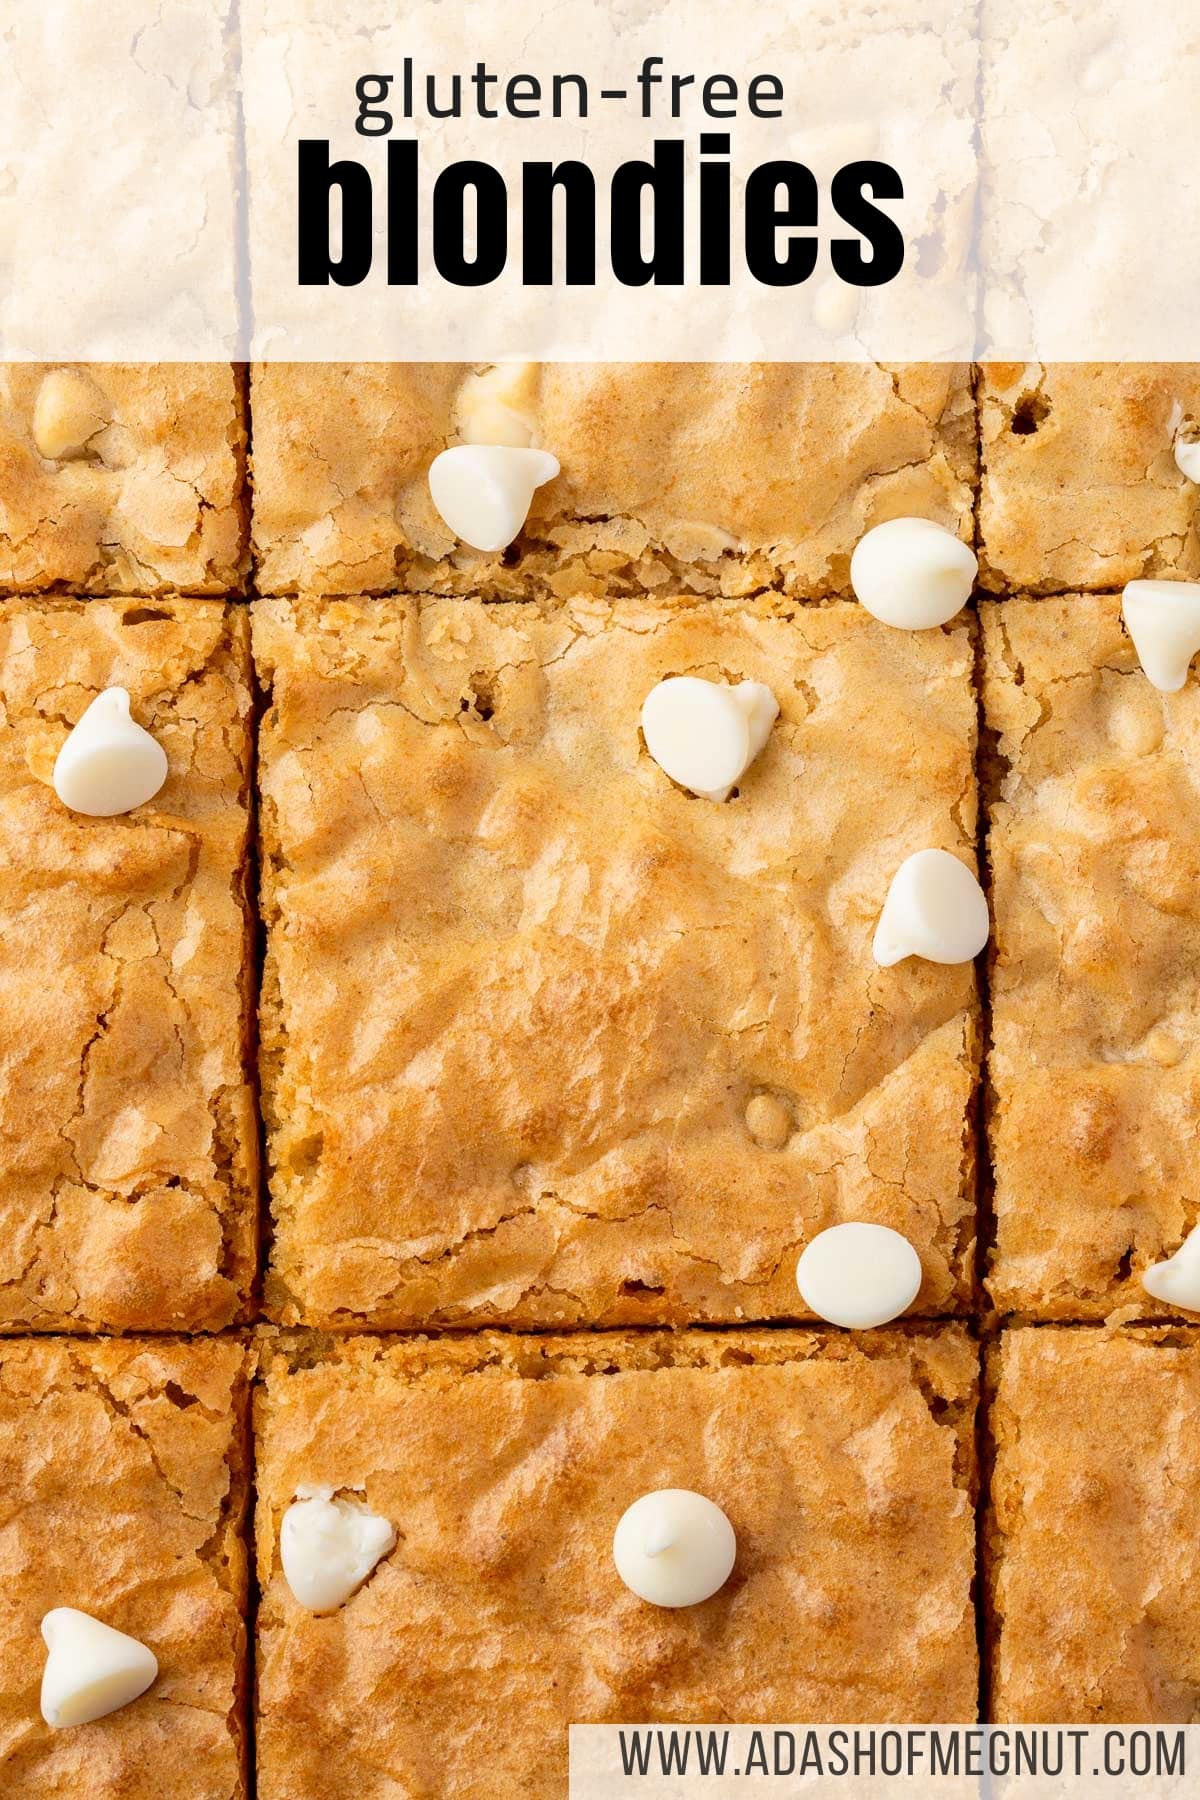 A close up view of 9 gluten-free blondies cut into squares.